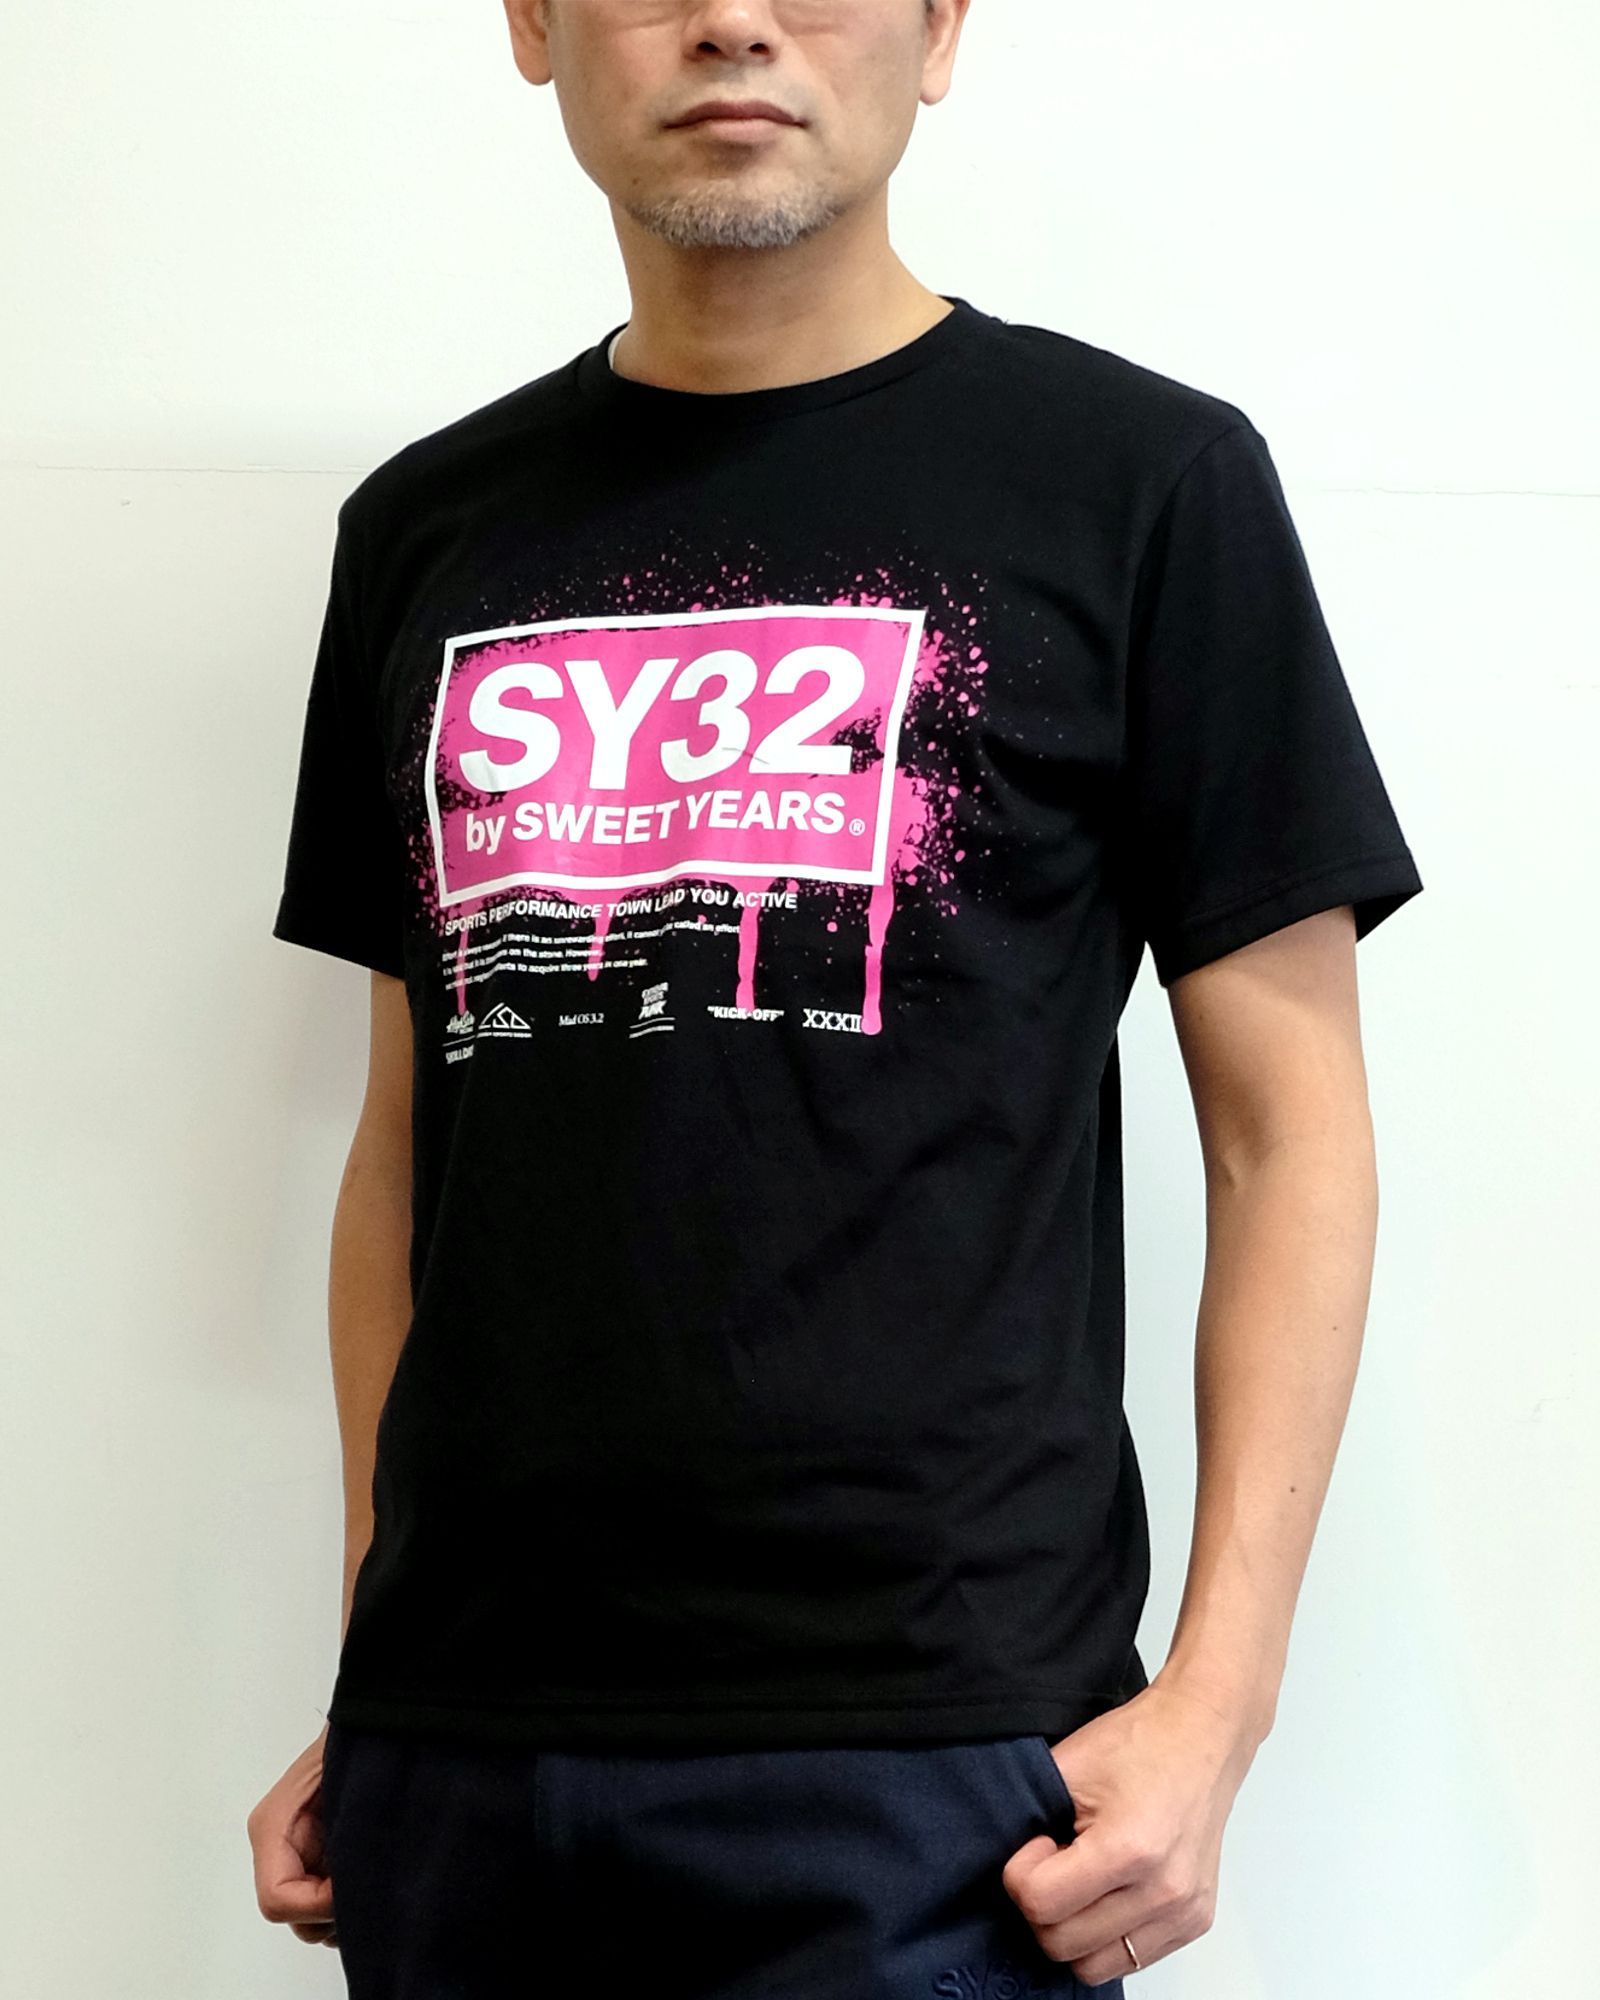 【S 残り1】【即日発送可】 フルレッサントゥロゴ半袖TEE (BLK/F.PINK) 11476J - S